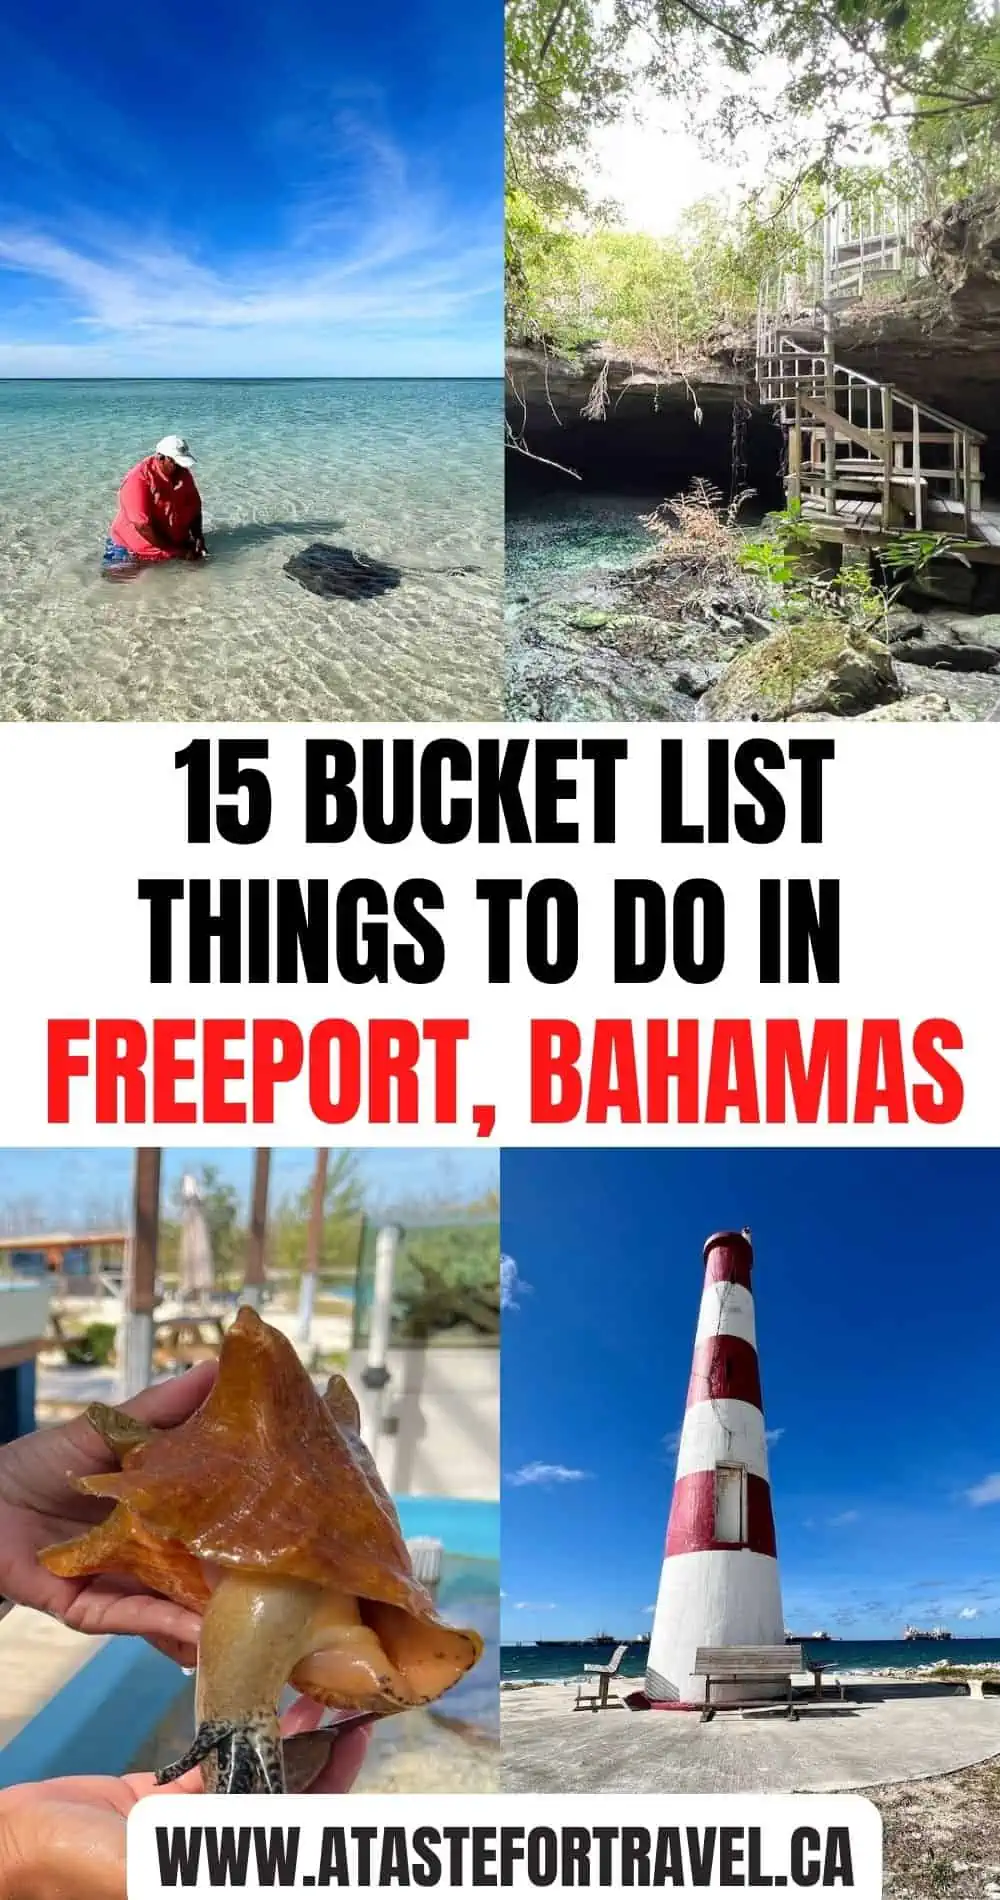 Collage of 15 bucket list things to do in Freeport Bahamas.